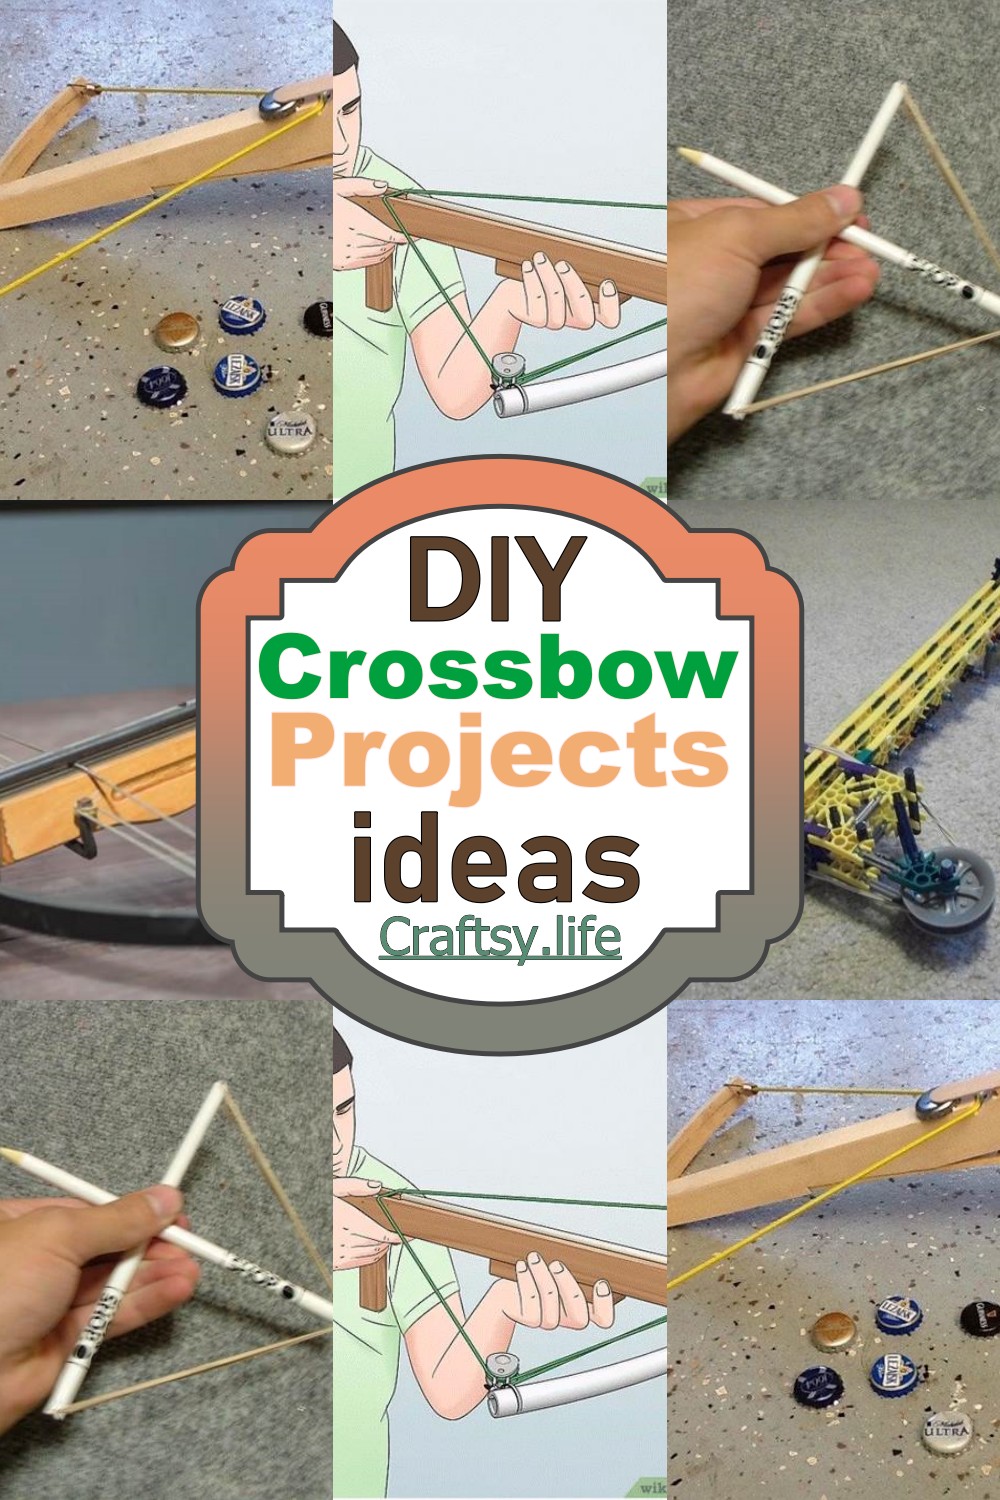 Crossbow Projects